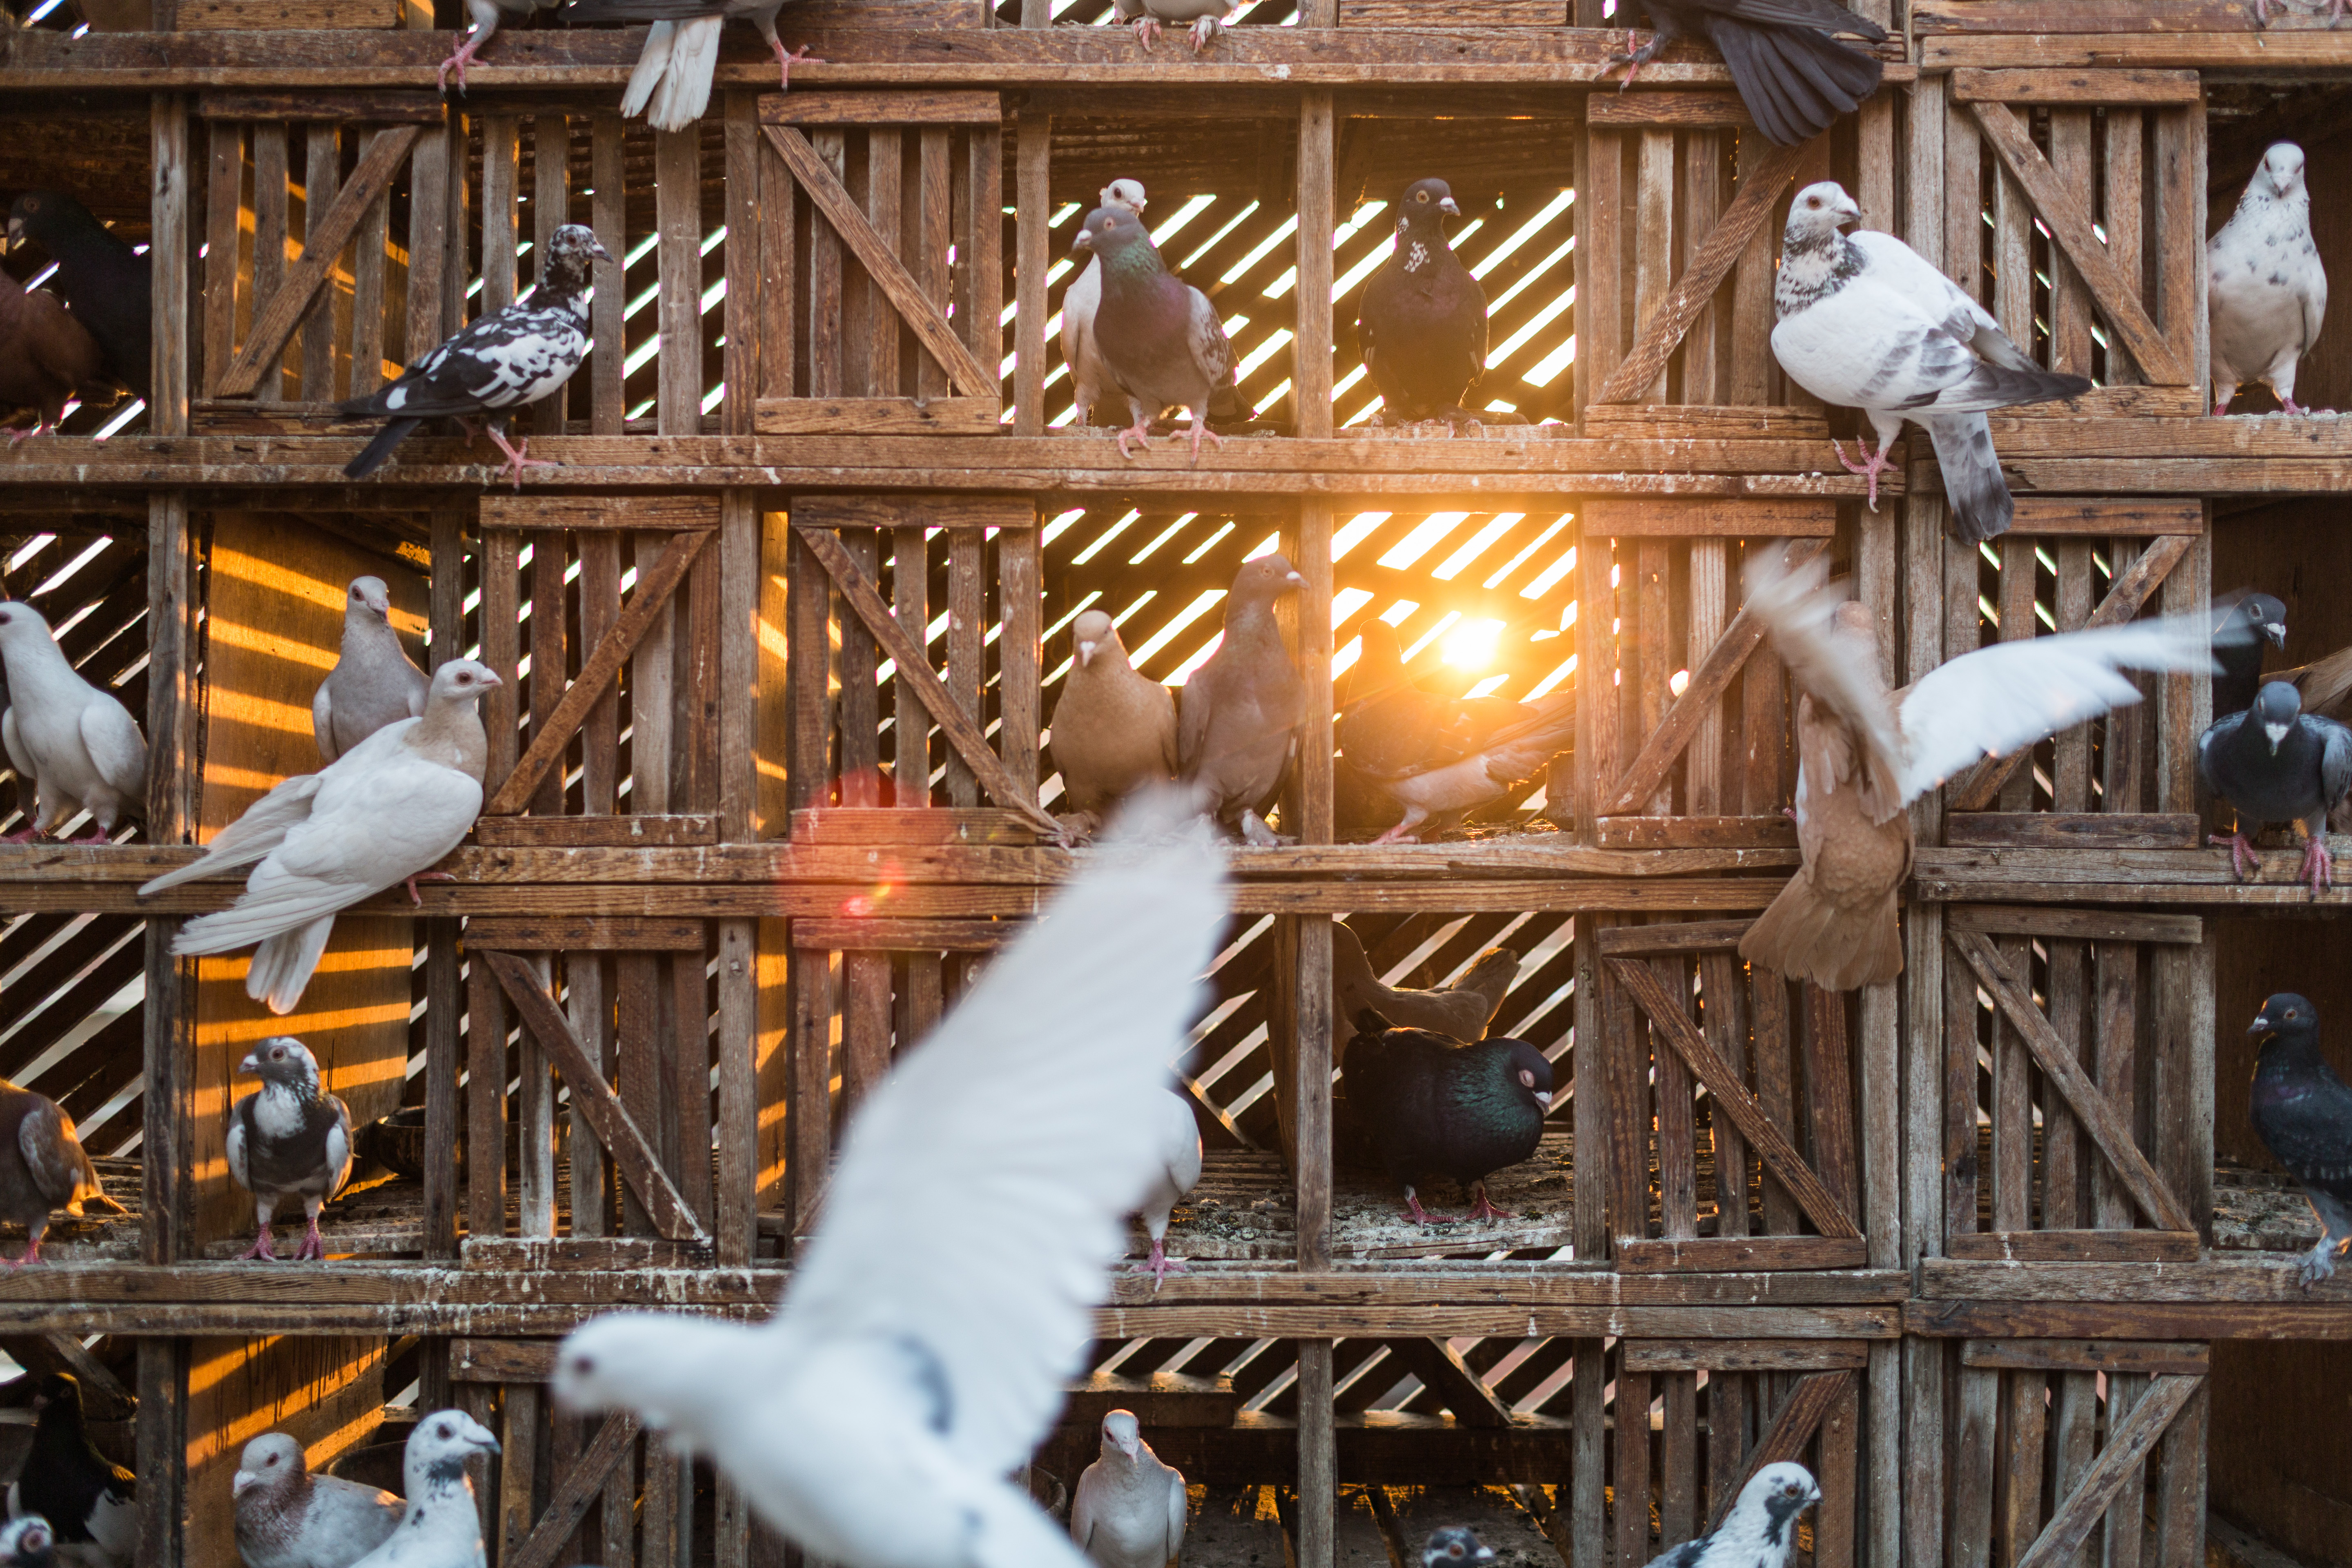 Pigeons fly in a coop above Manshaet Nasr. In the unregulated neighborhood of Manshaet Nasr many Christian's started family businessmen's of collecting and recycling Cairo's garbage in CAIRO, EGYPT on June 26.